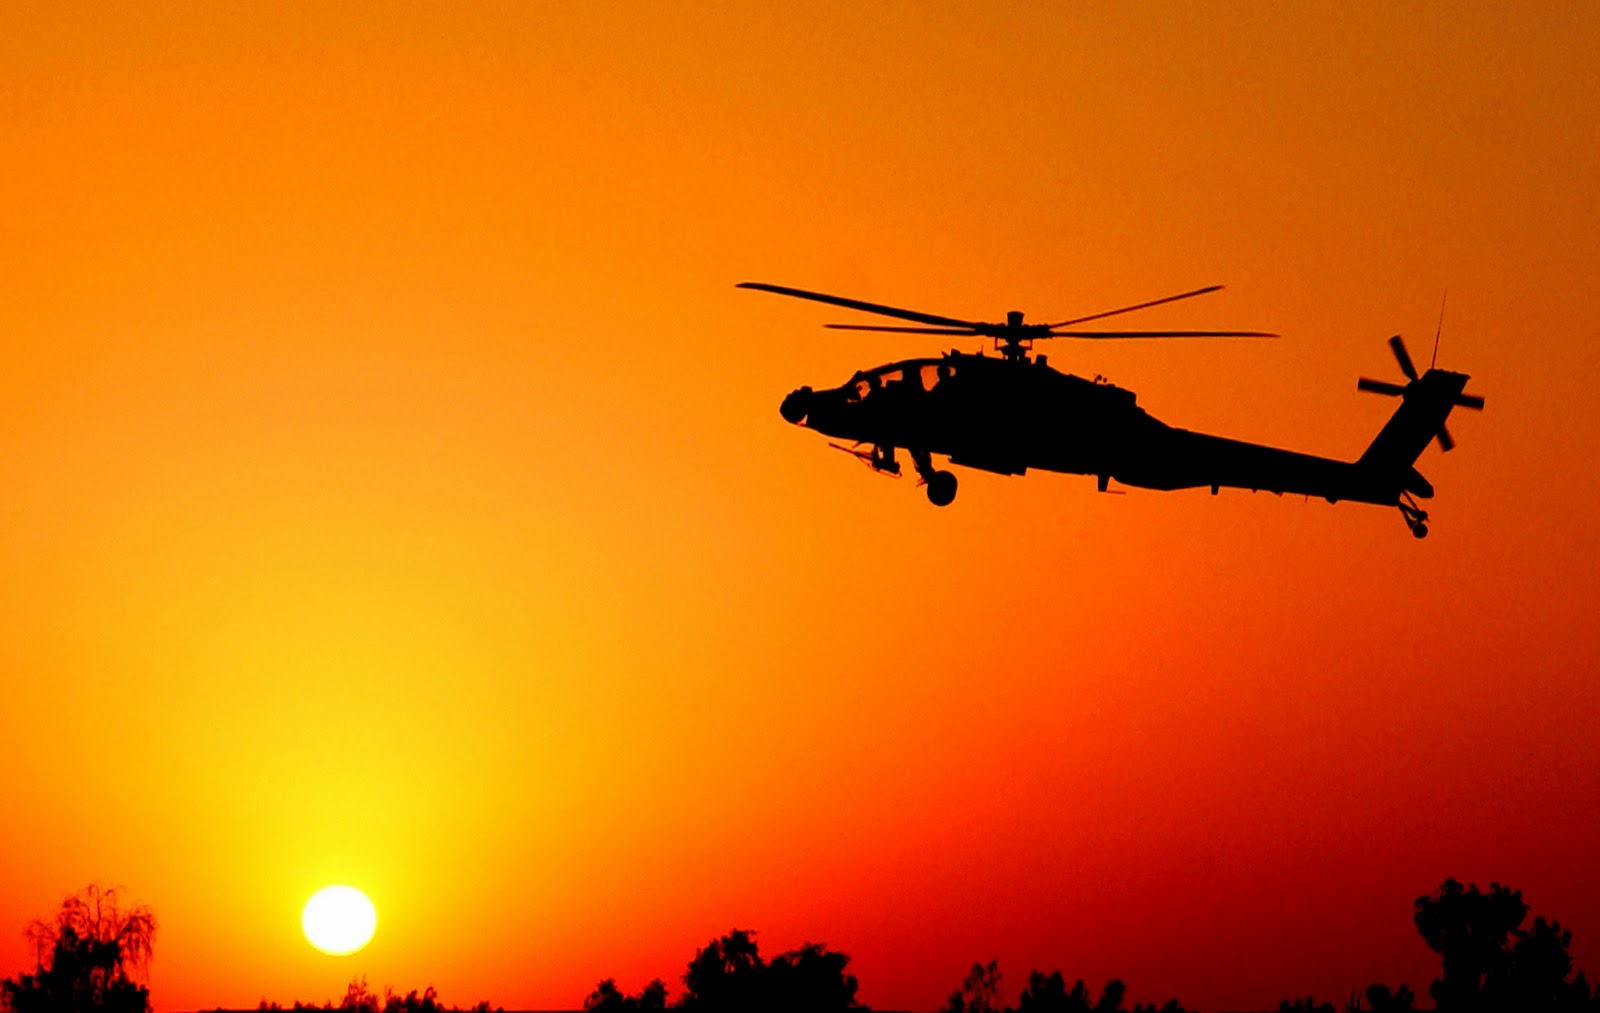 Apache Helicopters Sunset HD Wallpapers Desktop Wallpapers 1600x1013